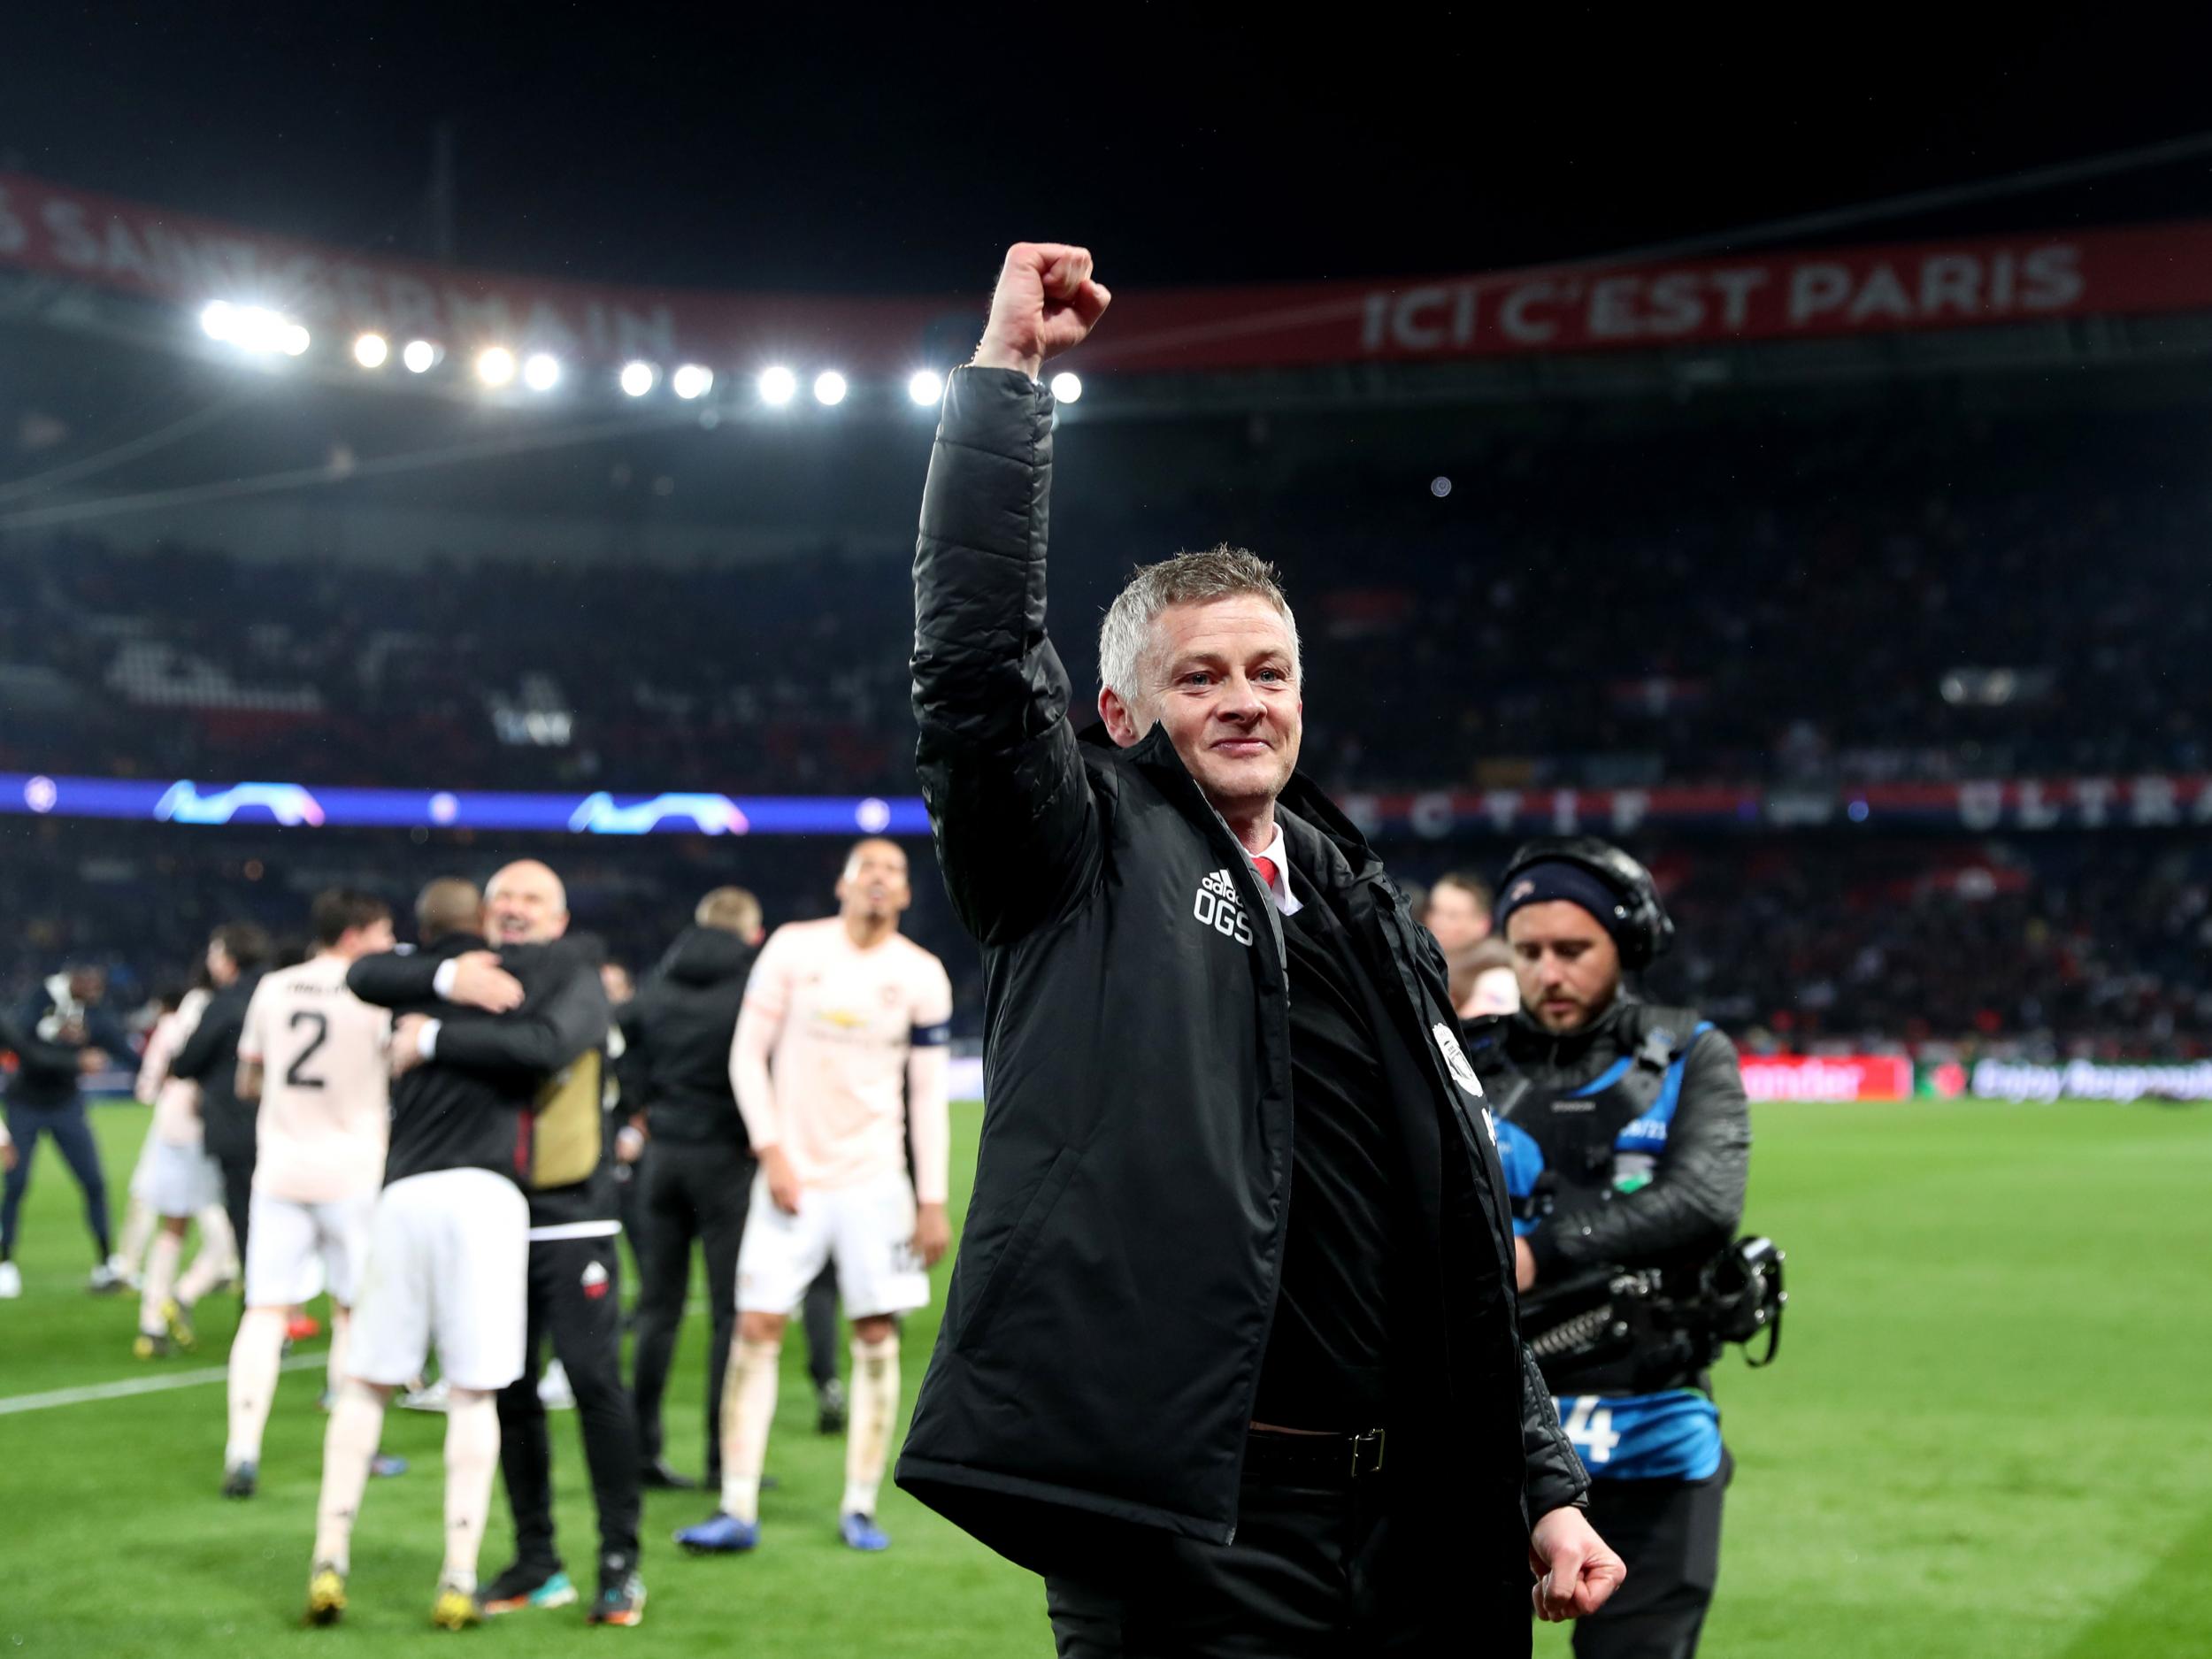 Ole Gunnar Solskjaer sees no reason why Manchester United cannot win the Champions League